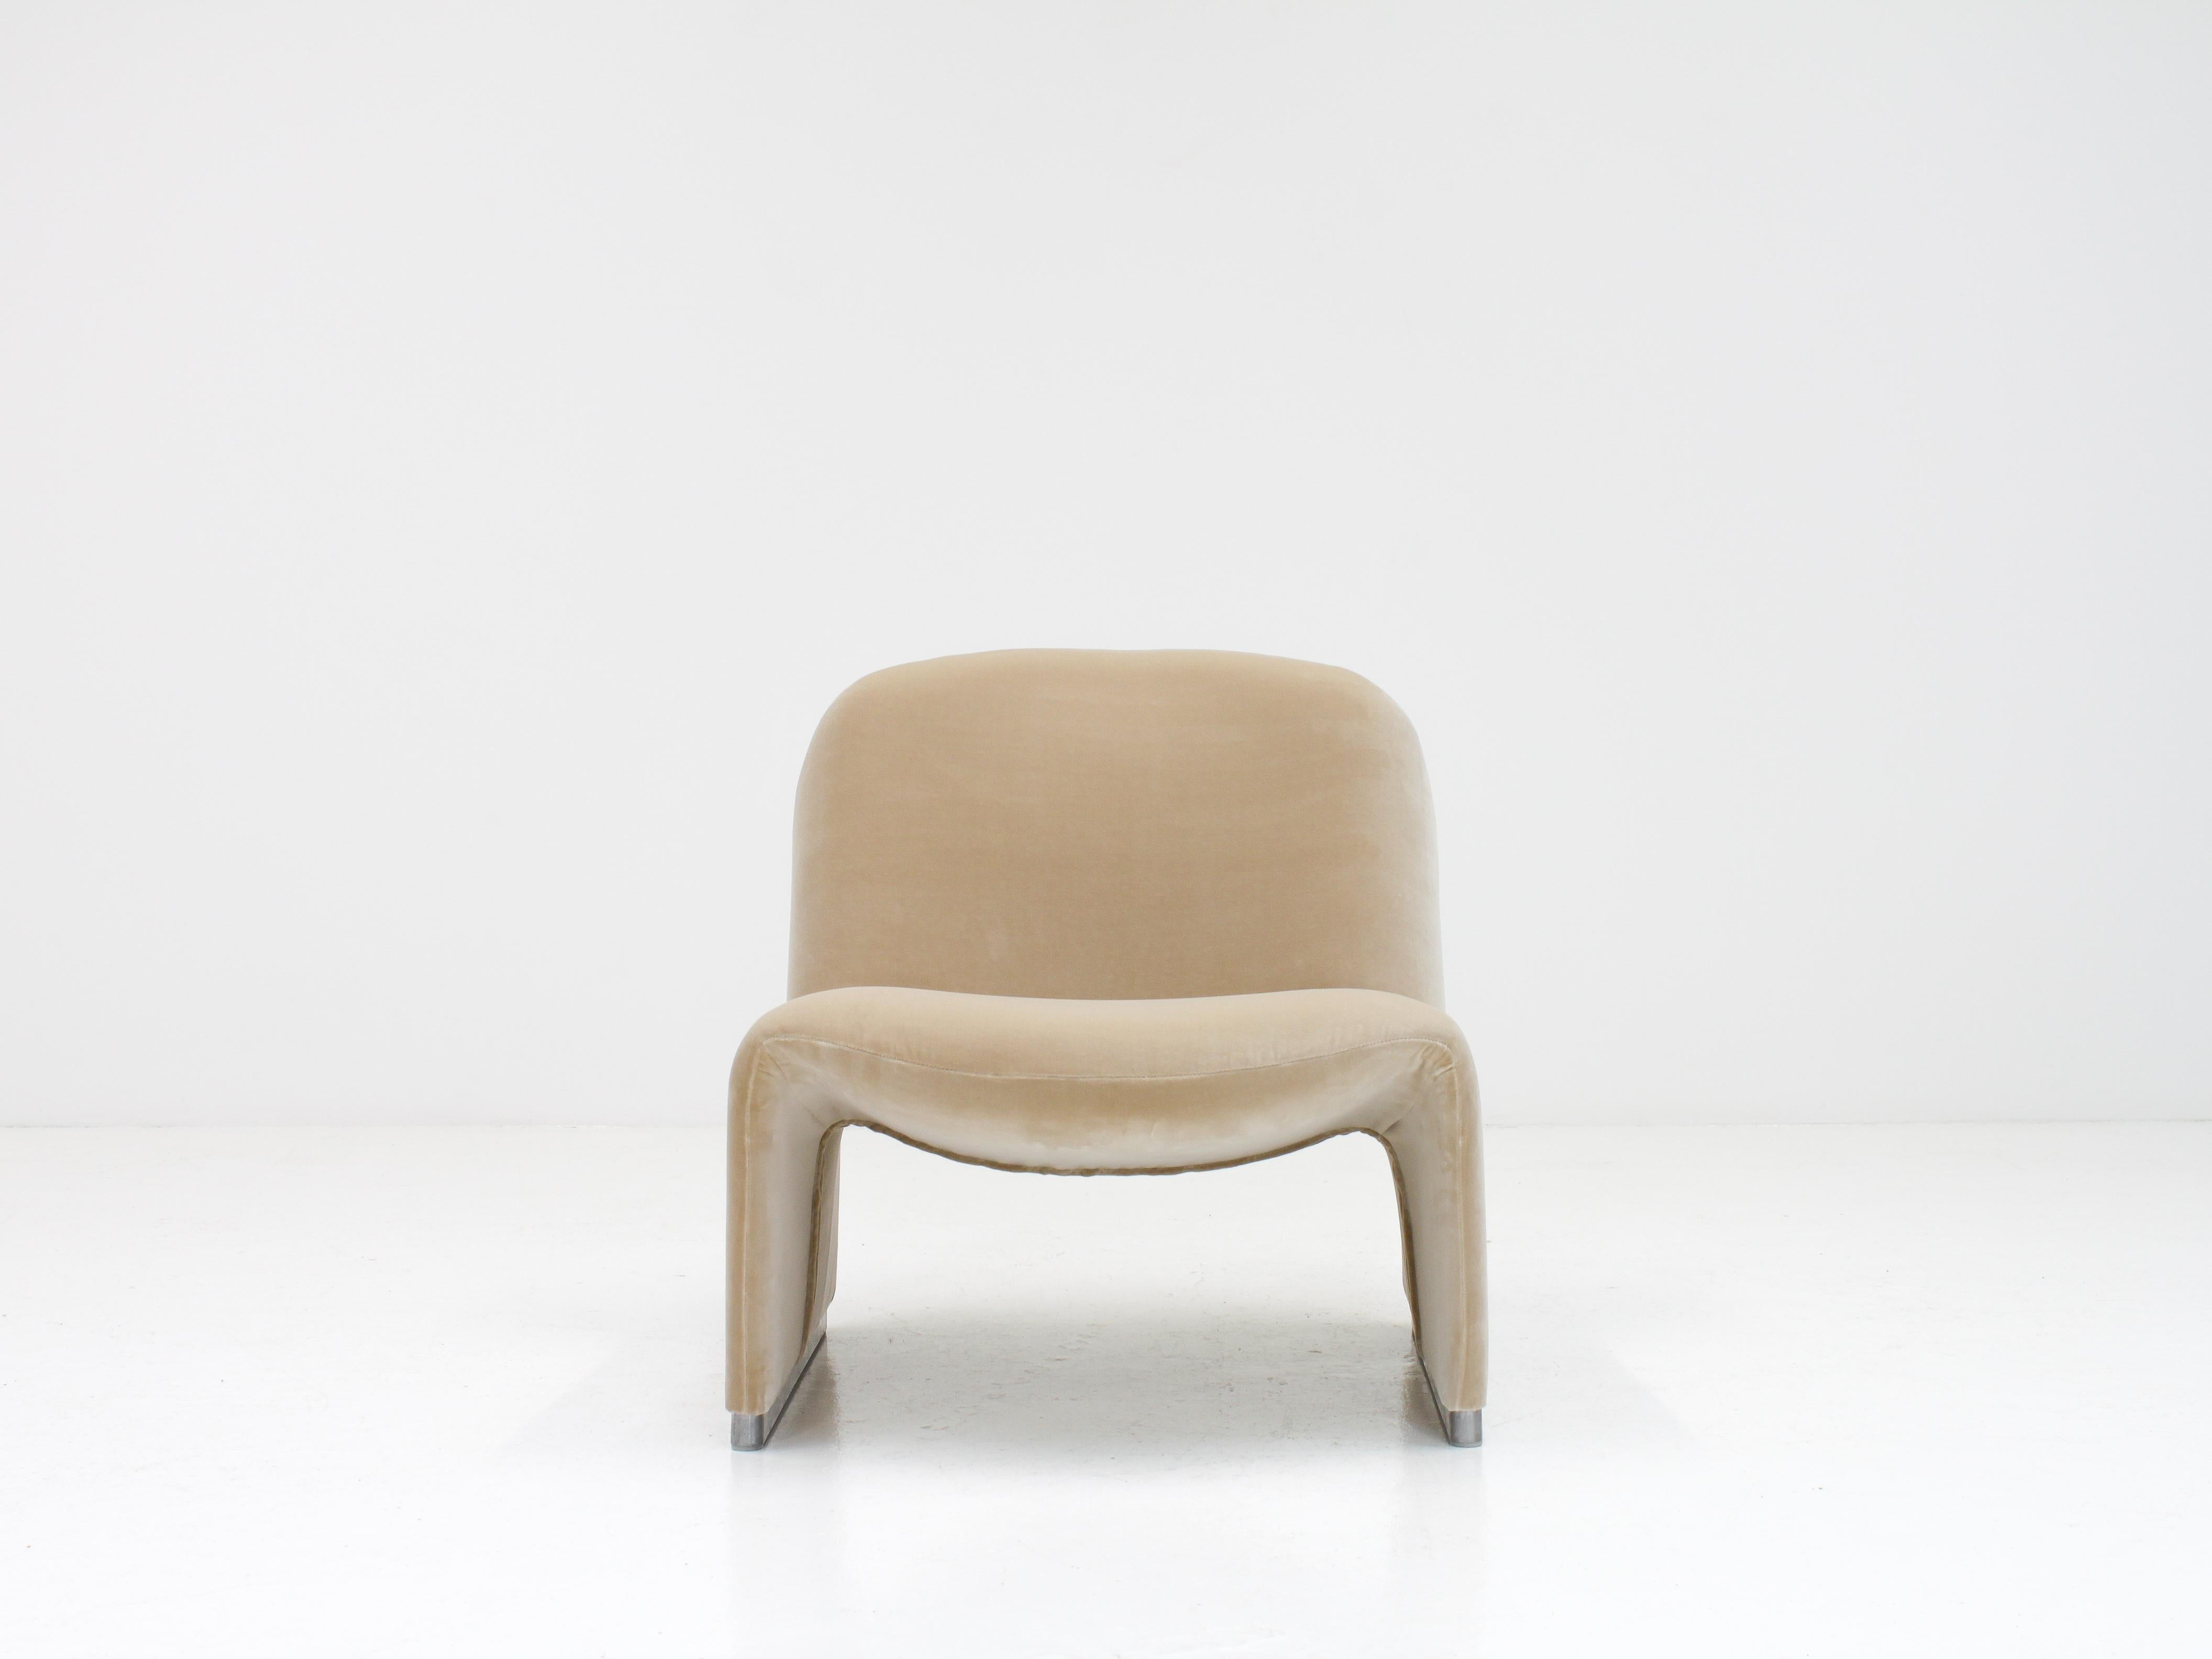 Giancarlo Piretti “Alky” Chairs in New Velvet, Artifort, 1970s - *Customizable* For Sale 5